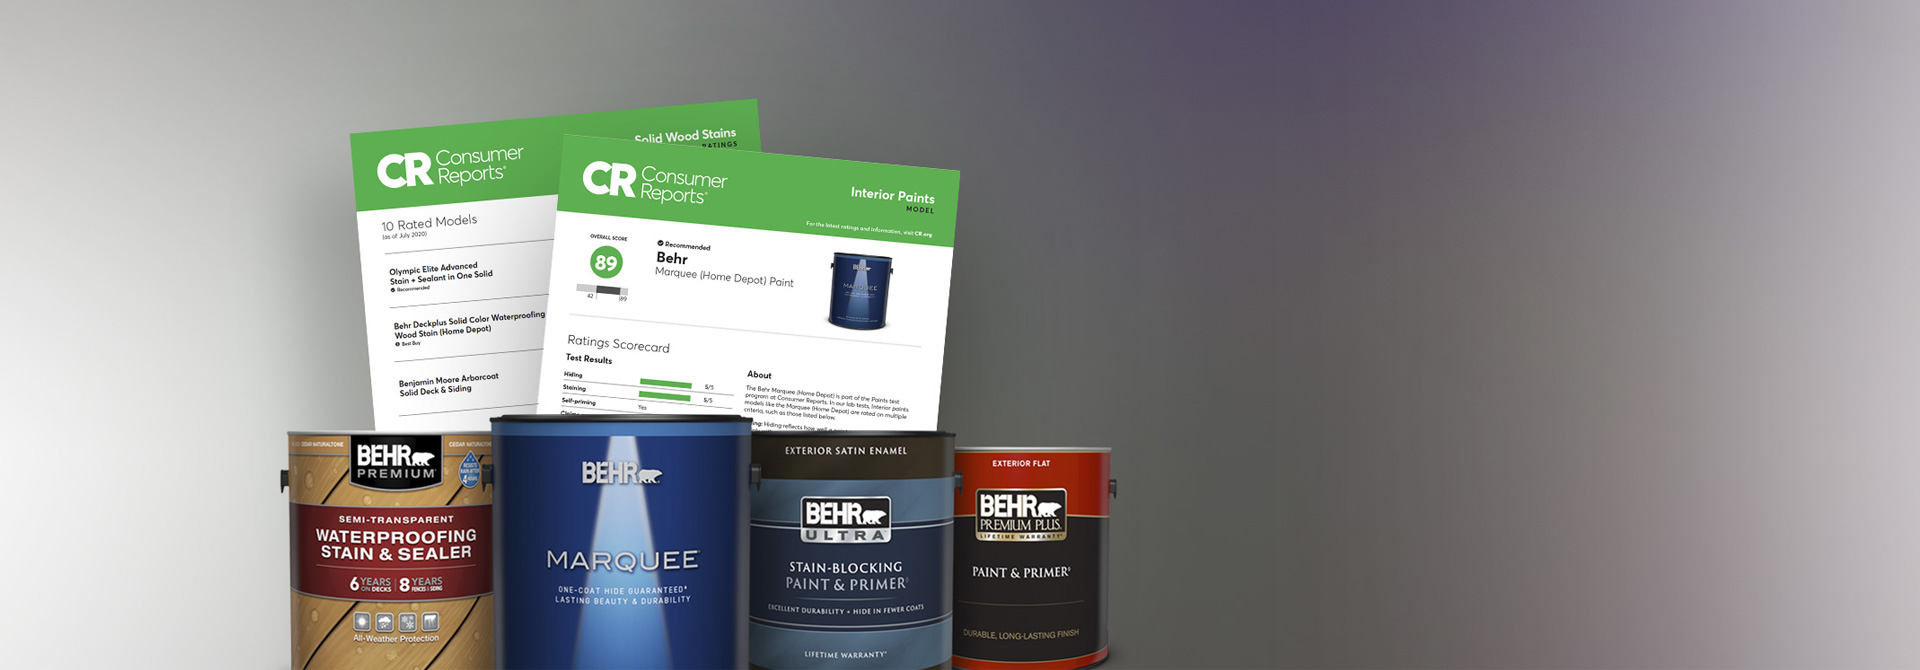 Image of 1 gal cans of Premium Plus Exterior Flat paint, Ultra Exterior Satin Enamel paint, Marquee Interior Satin Enamel,and Behr Premium Semi-Transparent Waterproofing Stain in the forefront. Two images of Consumer Reports findings are also showcased on image.